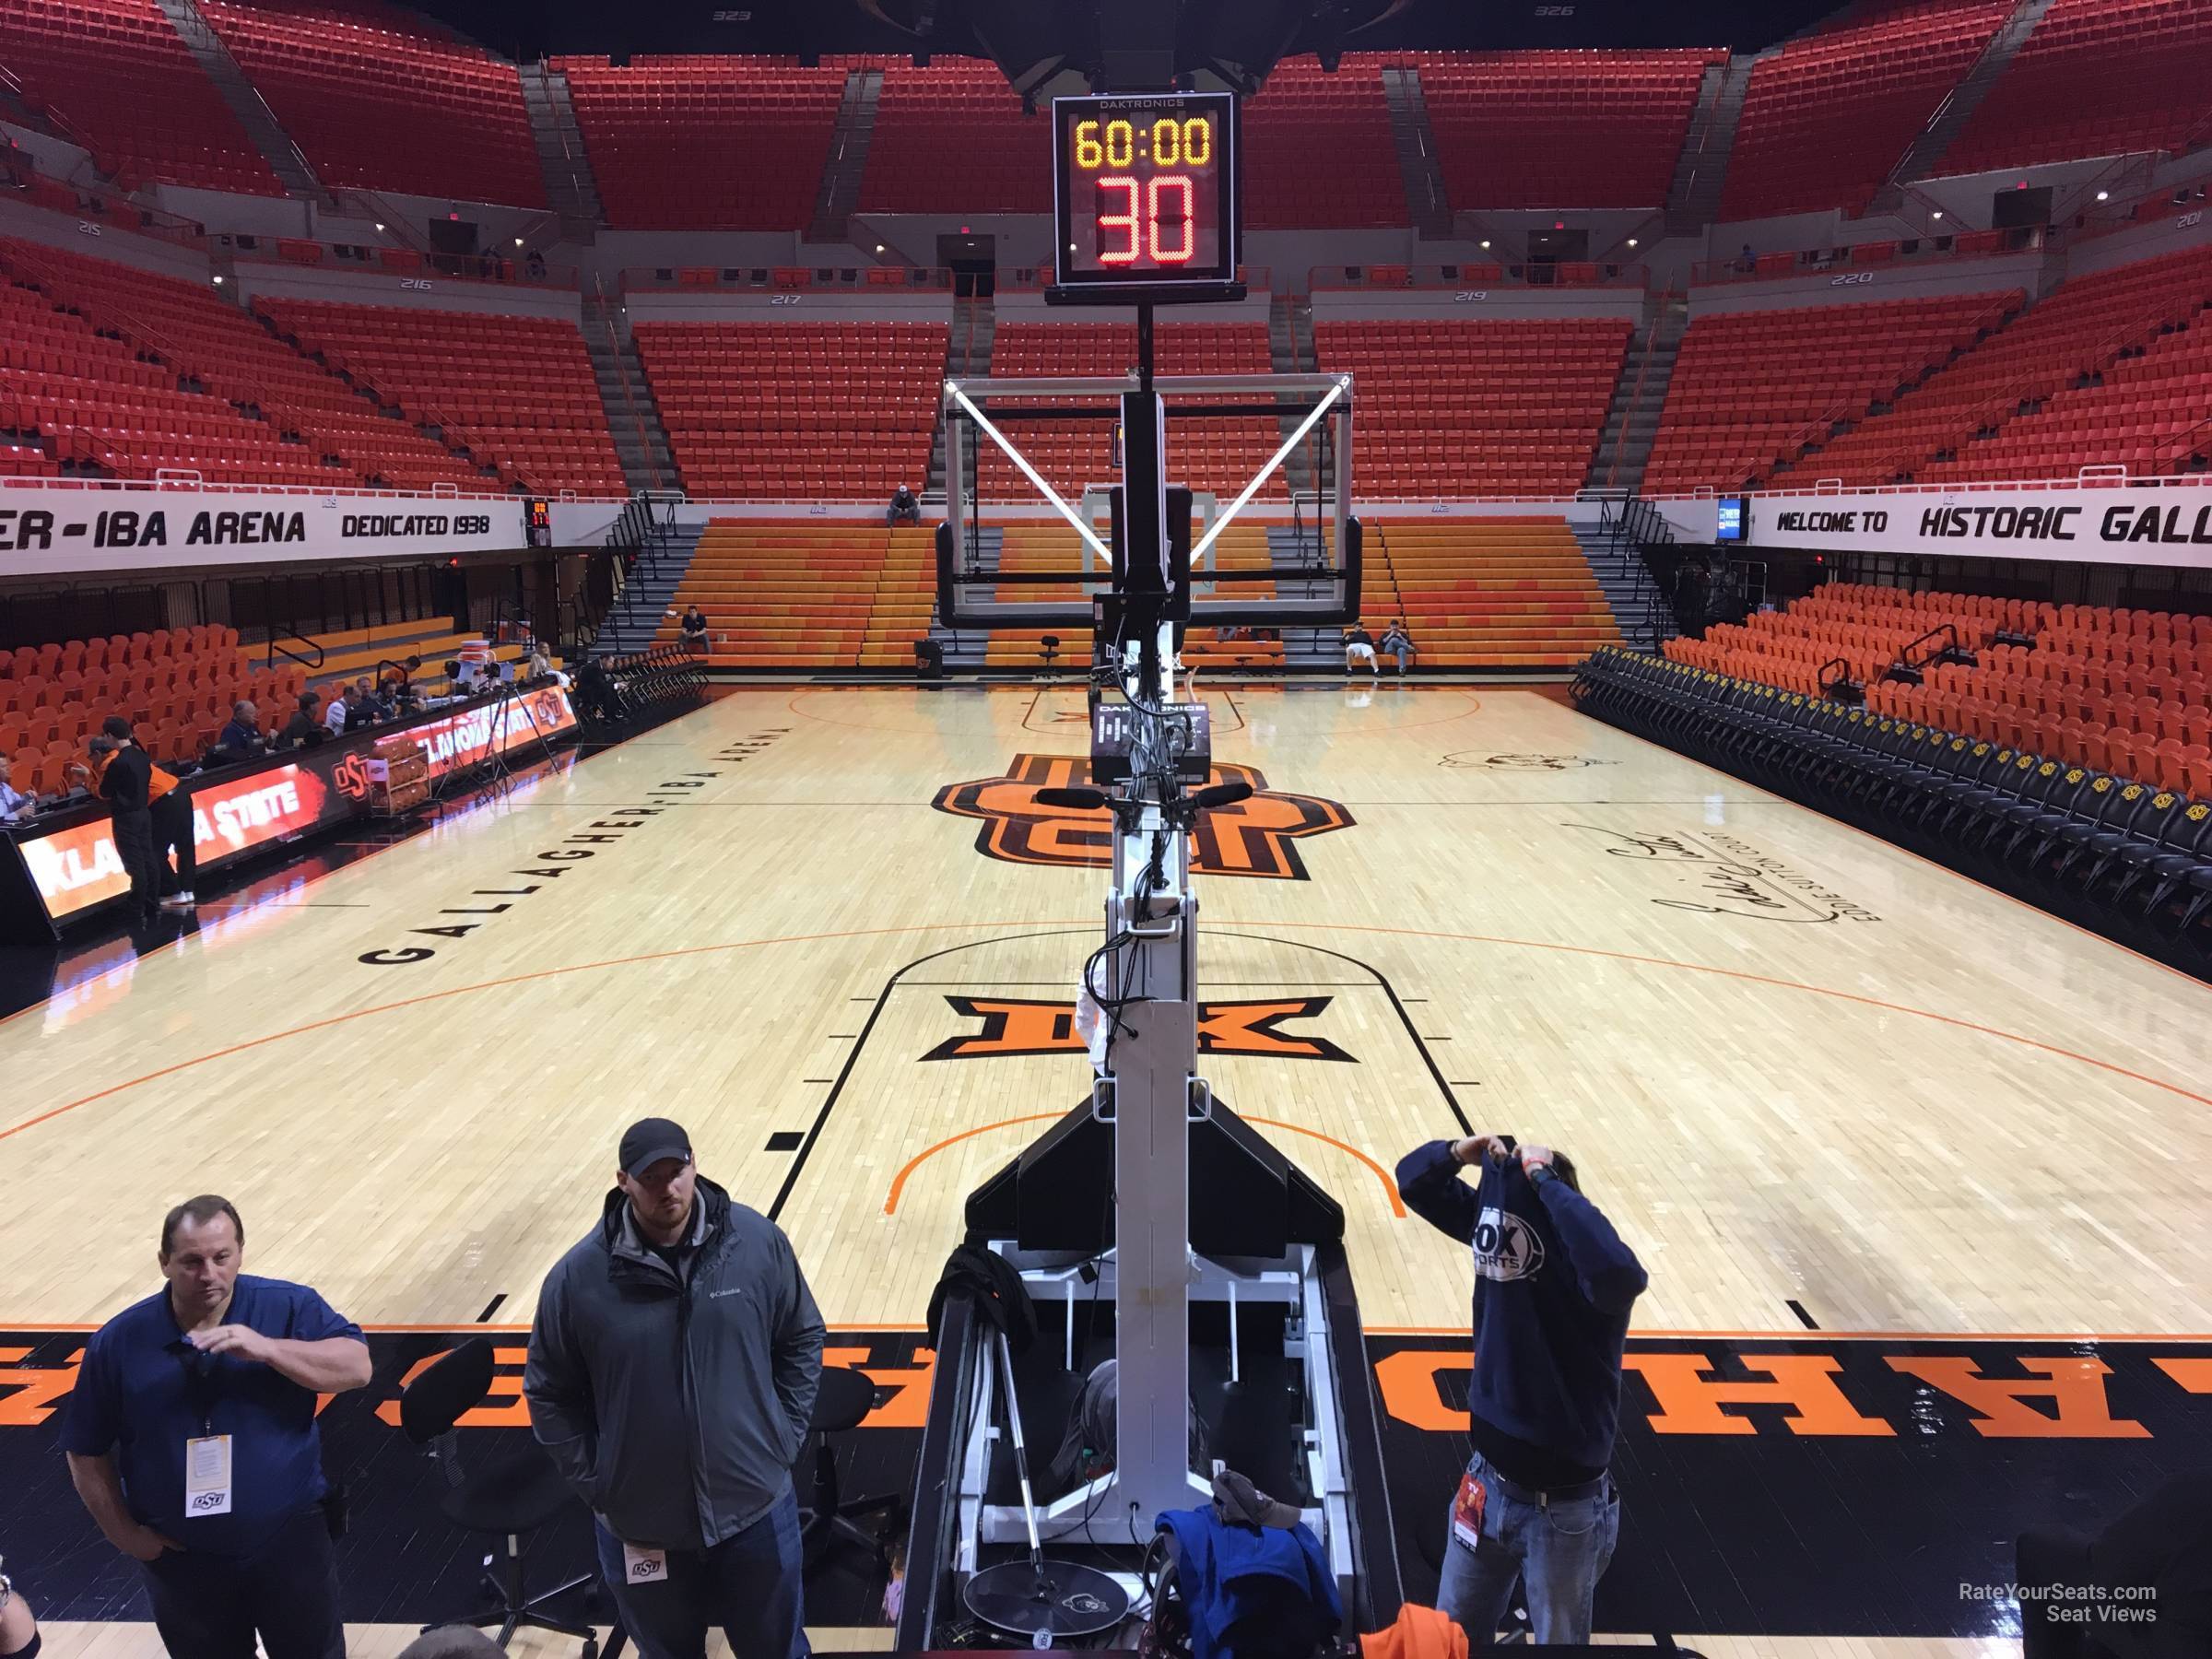 section 105, row 6 seat view  - gallagher-iba arena